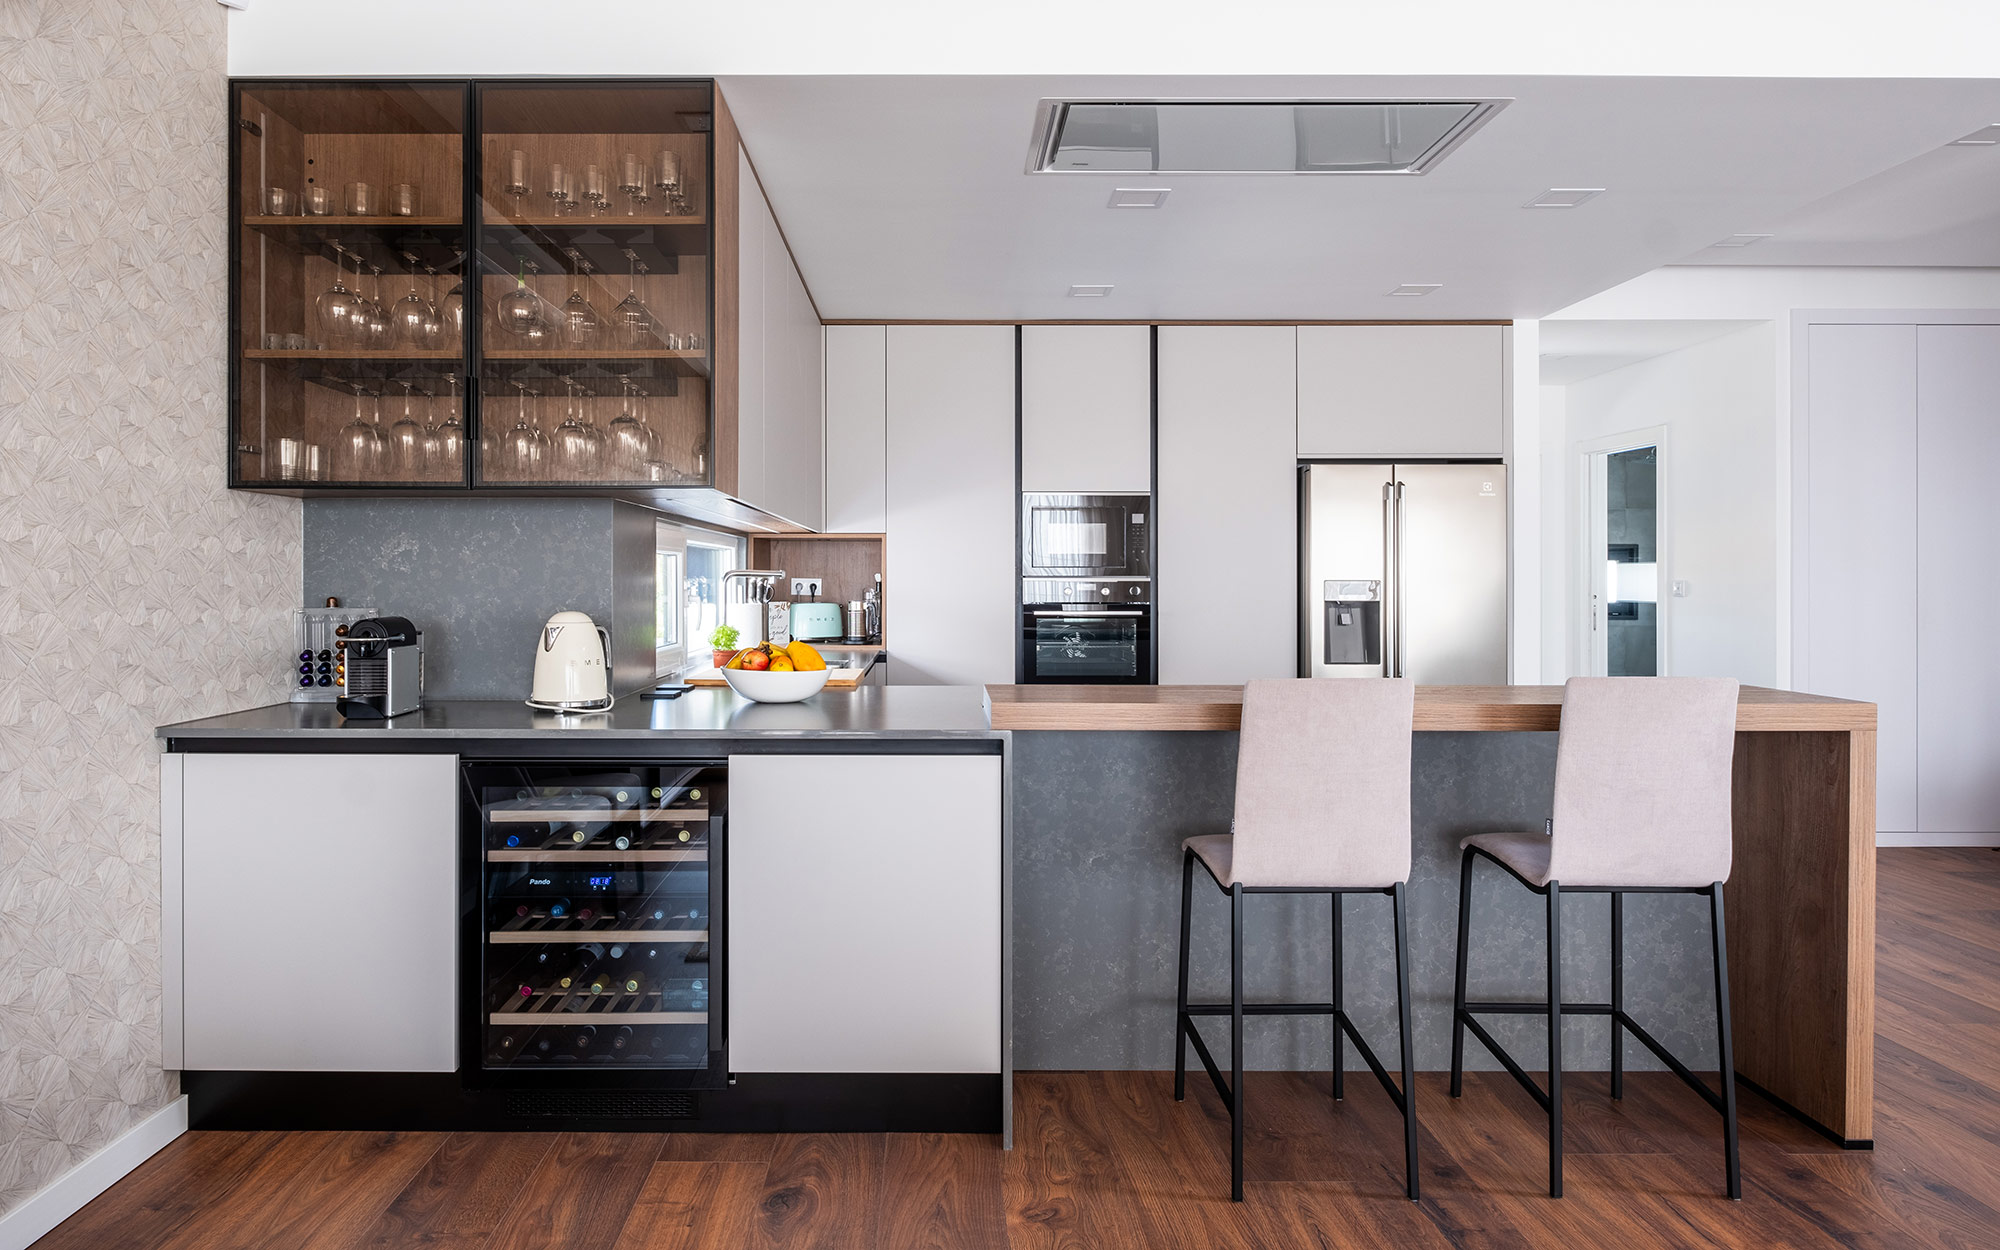 Image of Bilden vivienda unifamiliar 15 in Silestone Seaport as the guiding thread in a renovation project that reinterprets the industrial style - Cosentino